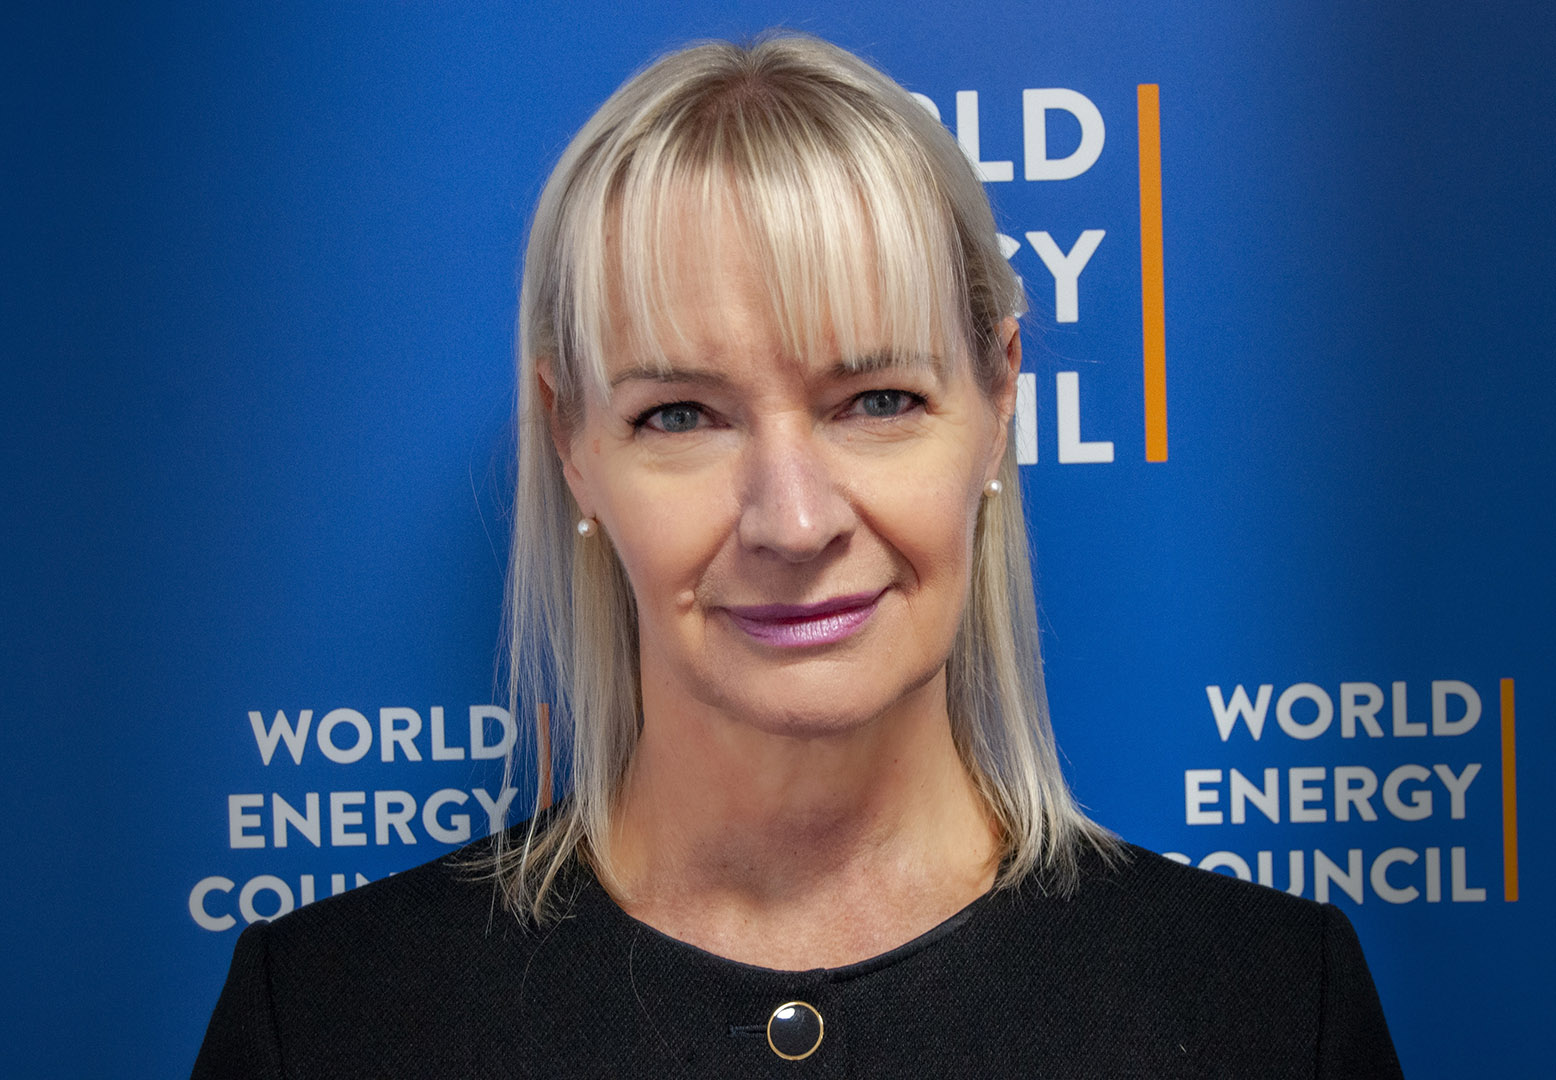 Angela Wilkinson, Secretary General & CEO of the World Energy Council